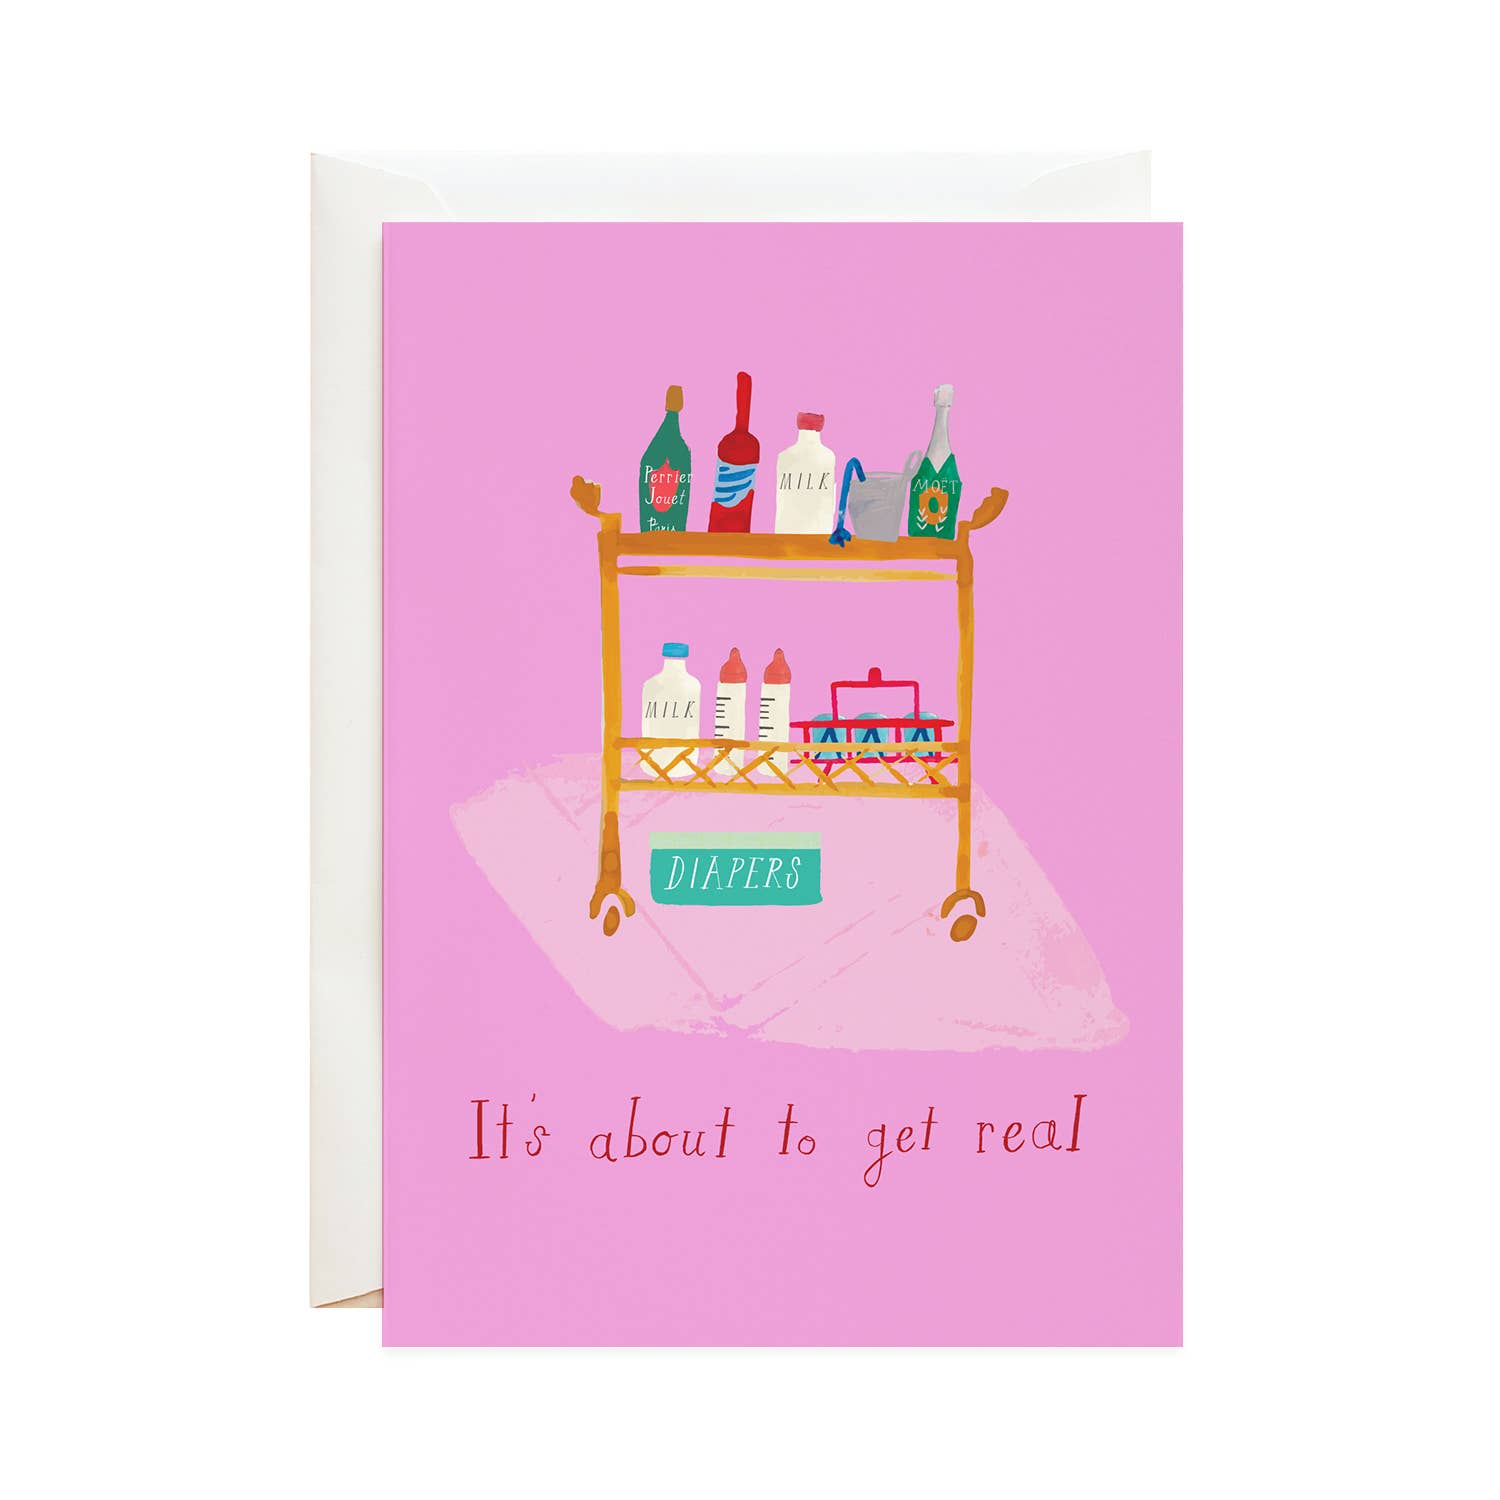 Baby-newborn-greeting card -- picture of bar cart with baby milk and supplies mixed in with alcohol bottles. At the bottom it reads "It's about to get real" 